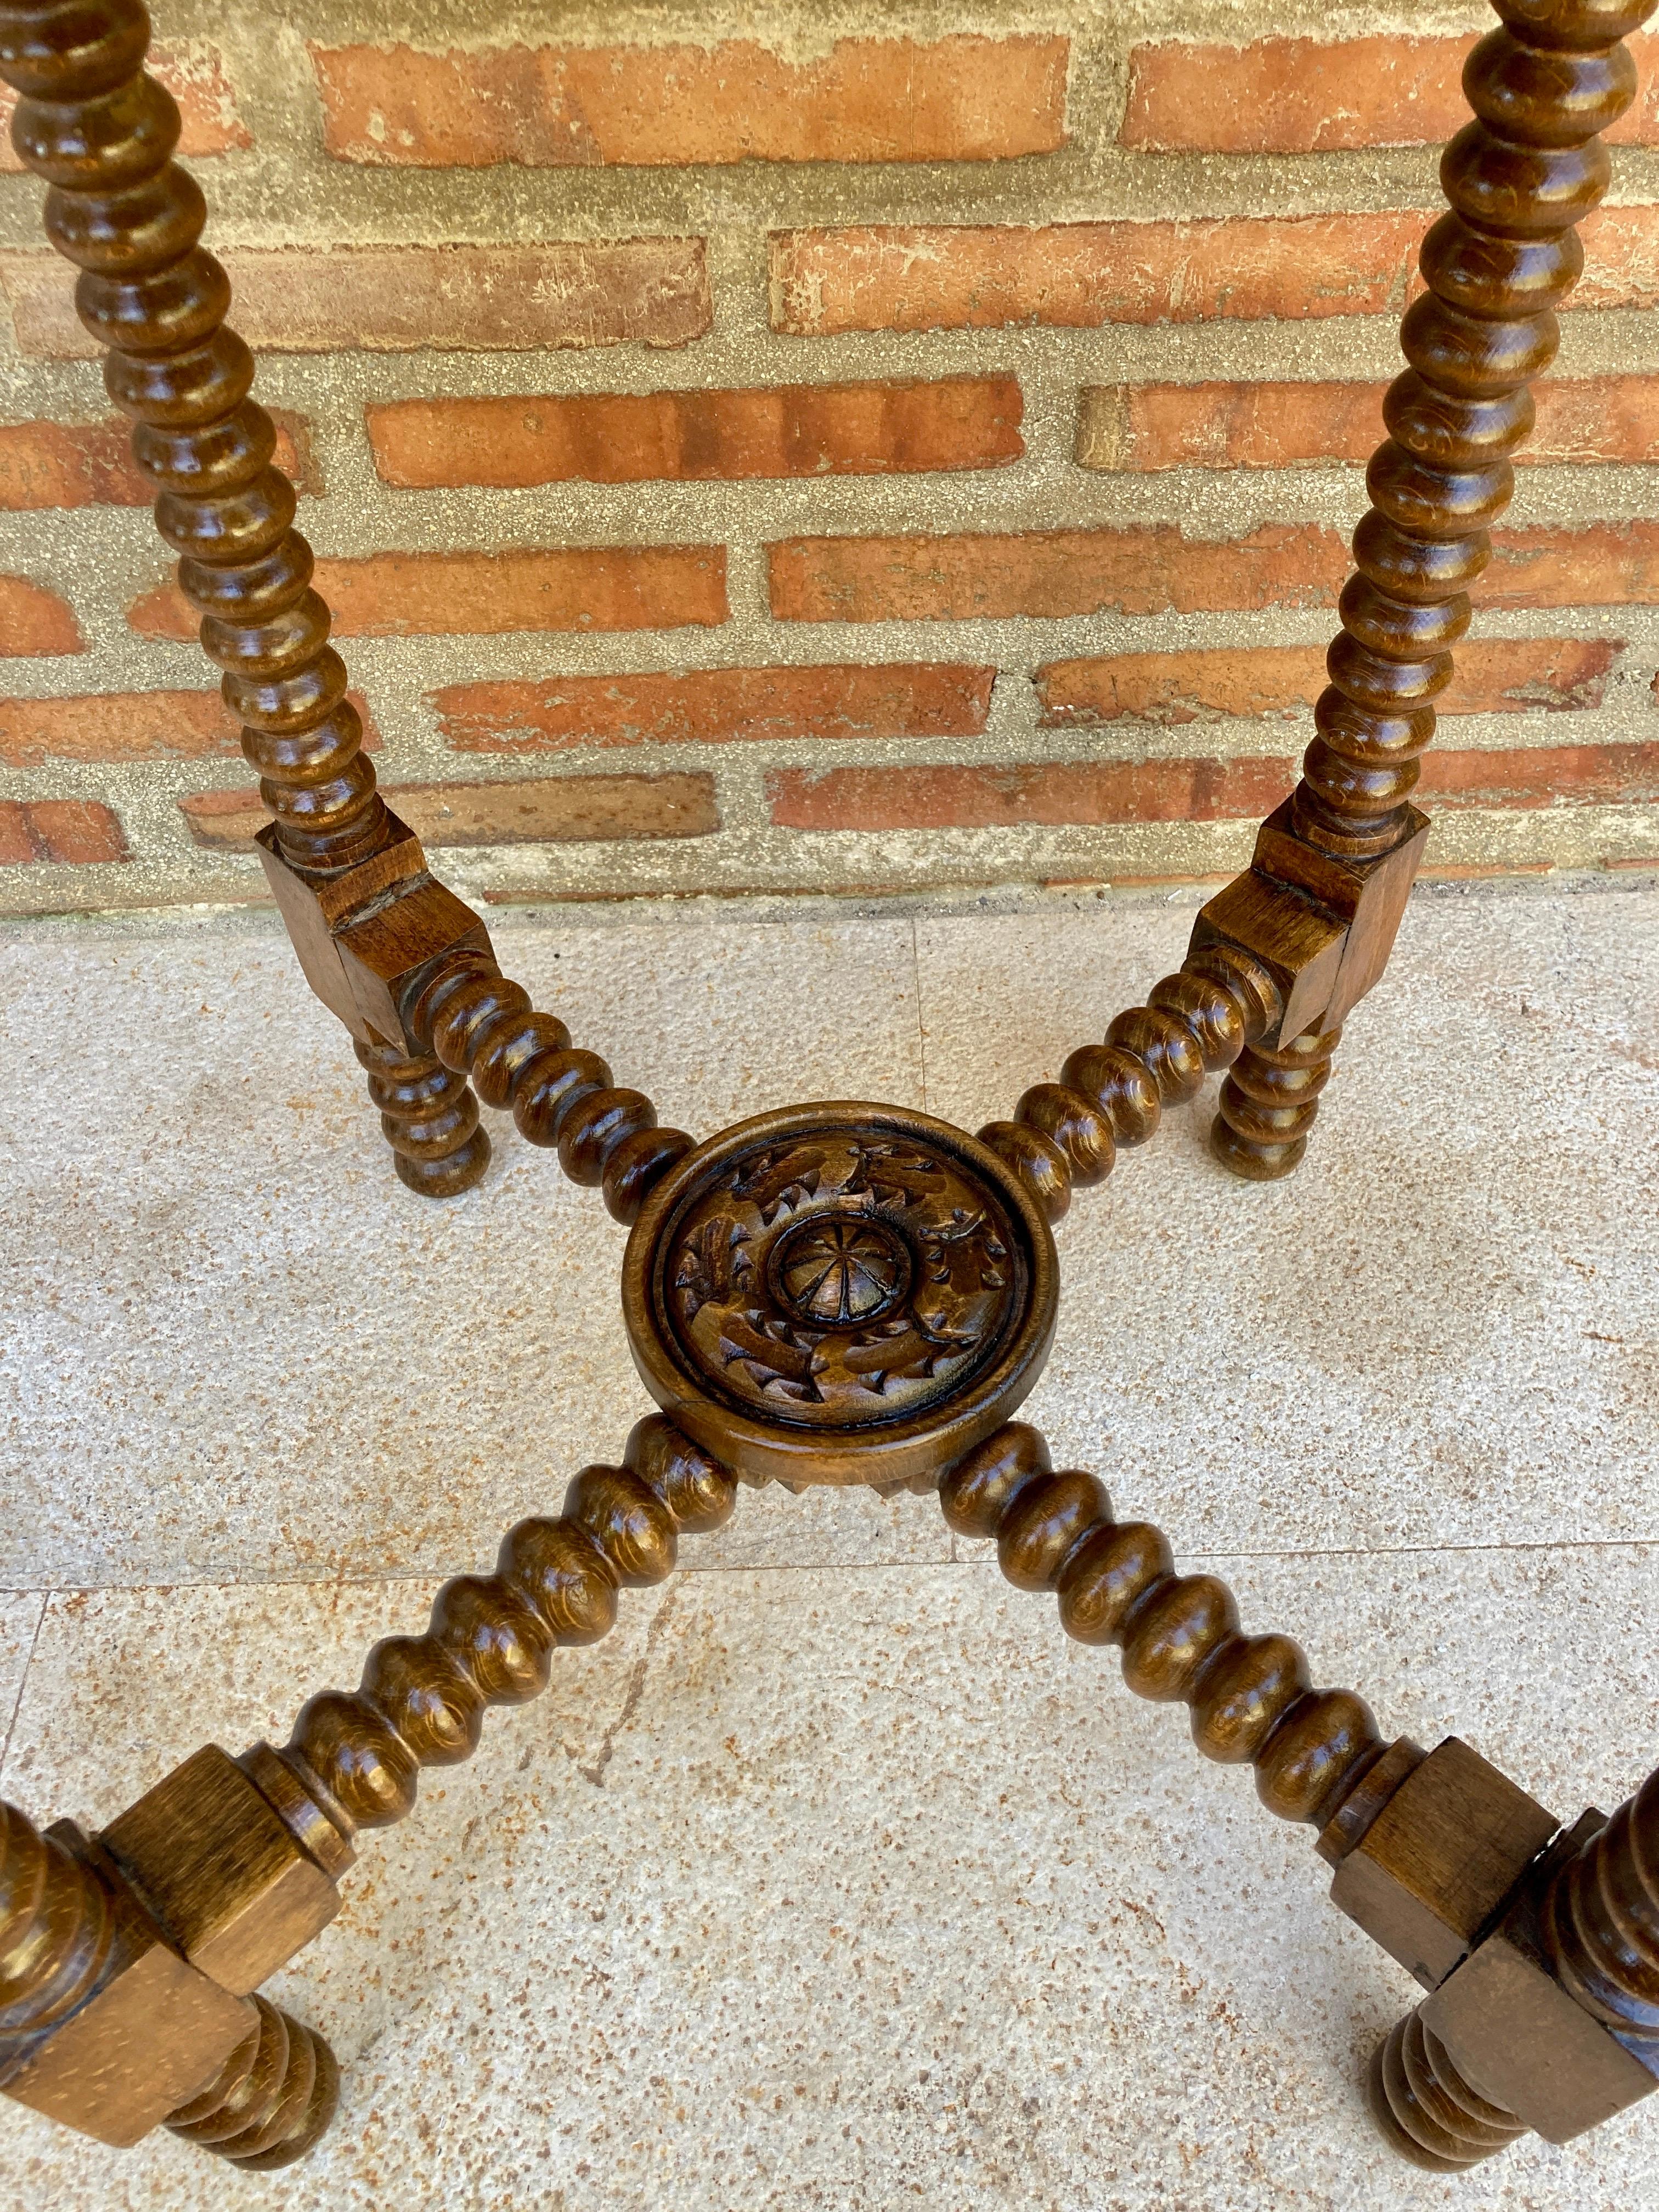 Spanish Round Walnut Side Table With Turned Legs And Beleveled Edges 1900s 5